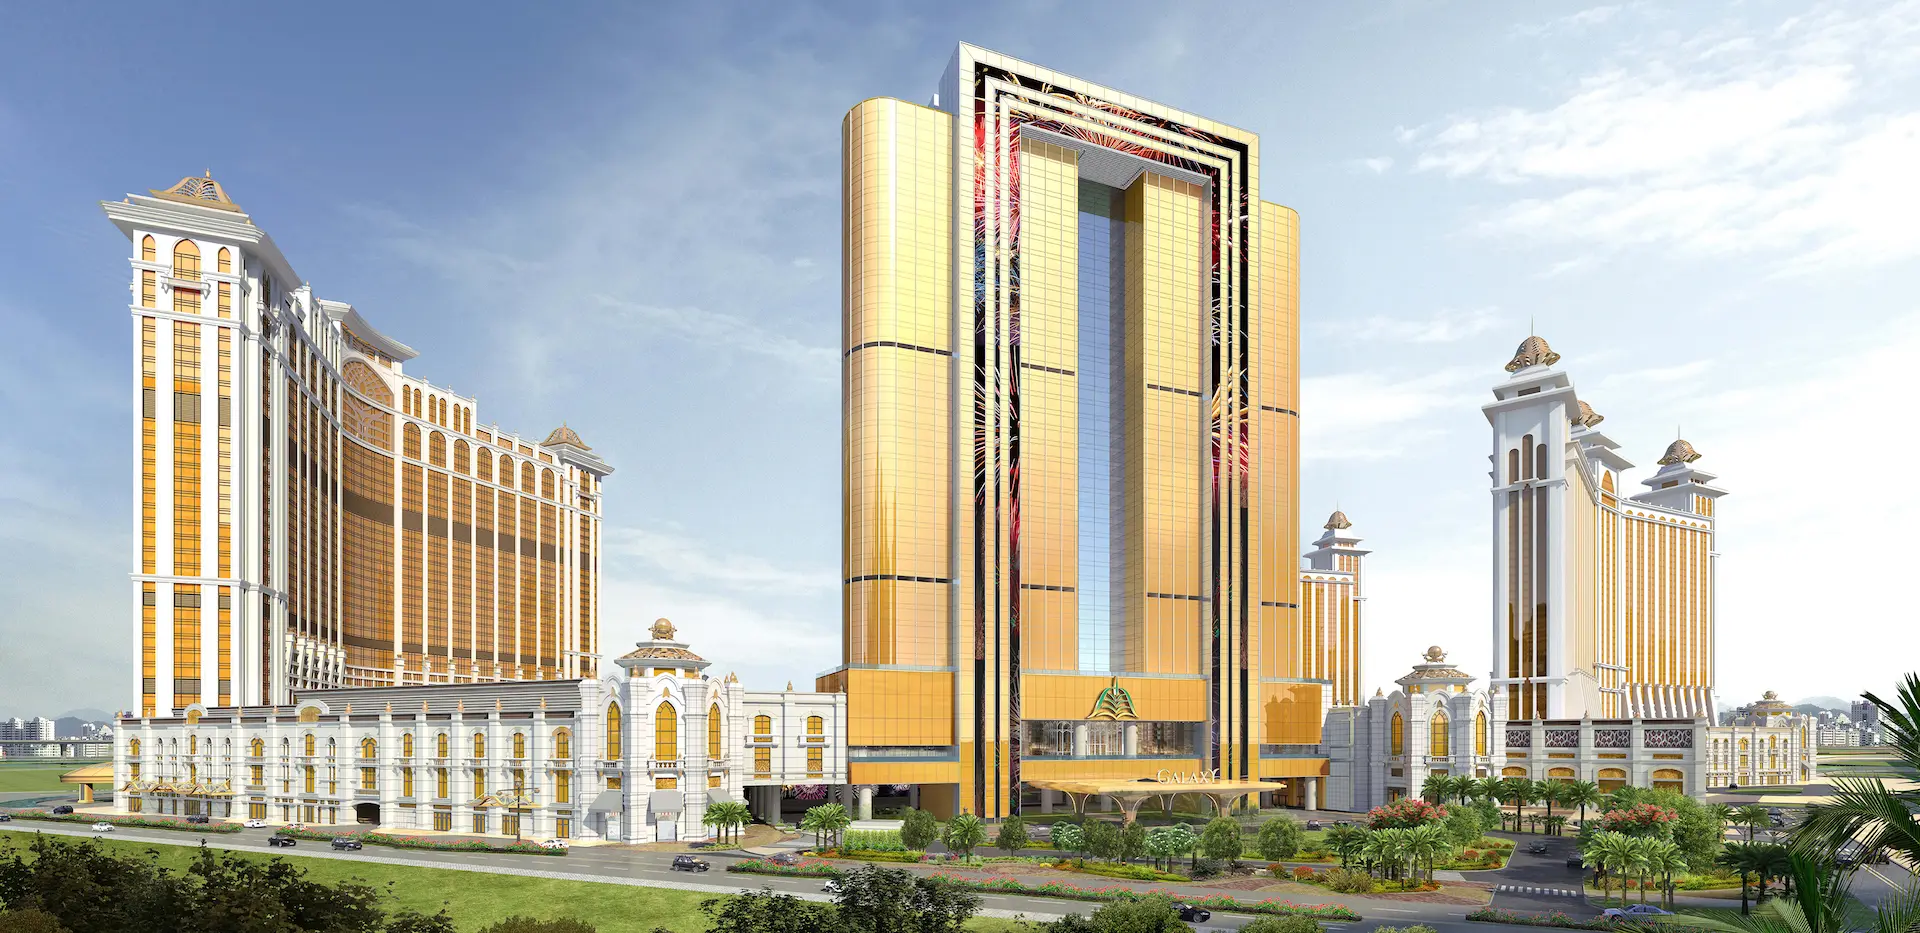 Galaxy Entertainment Group - Continues Expansion With The Development Of The Legendary Raffles At Galaxy Macau 